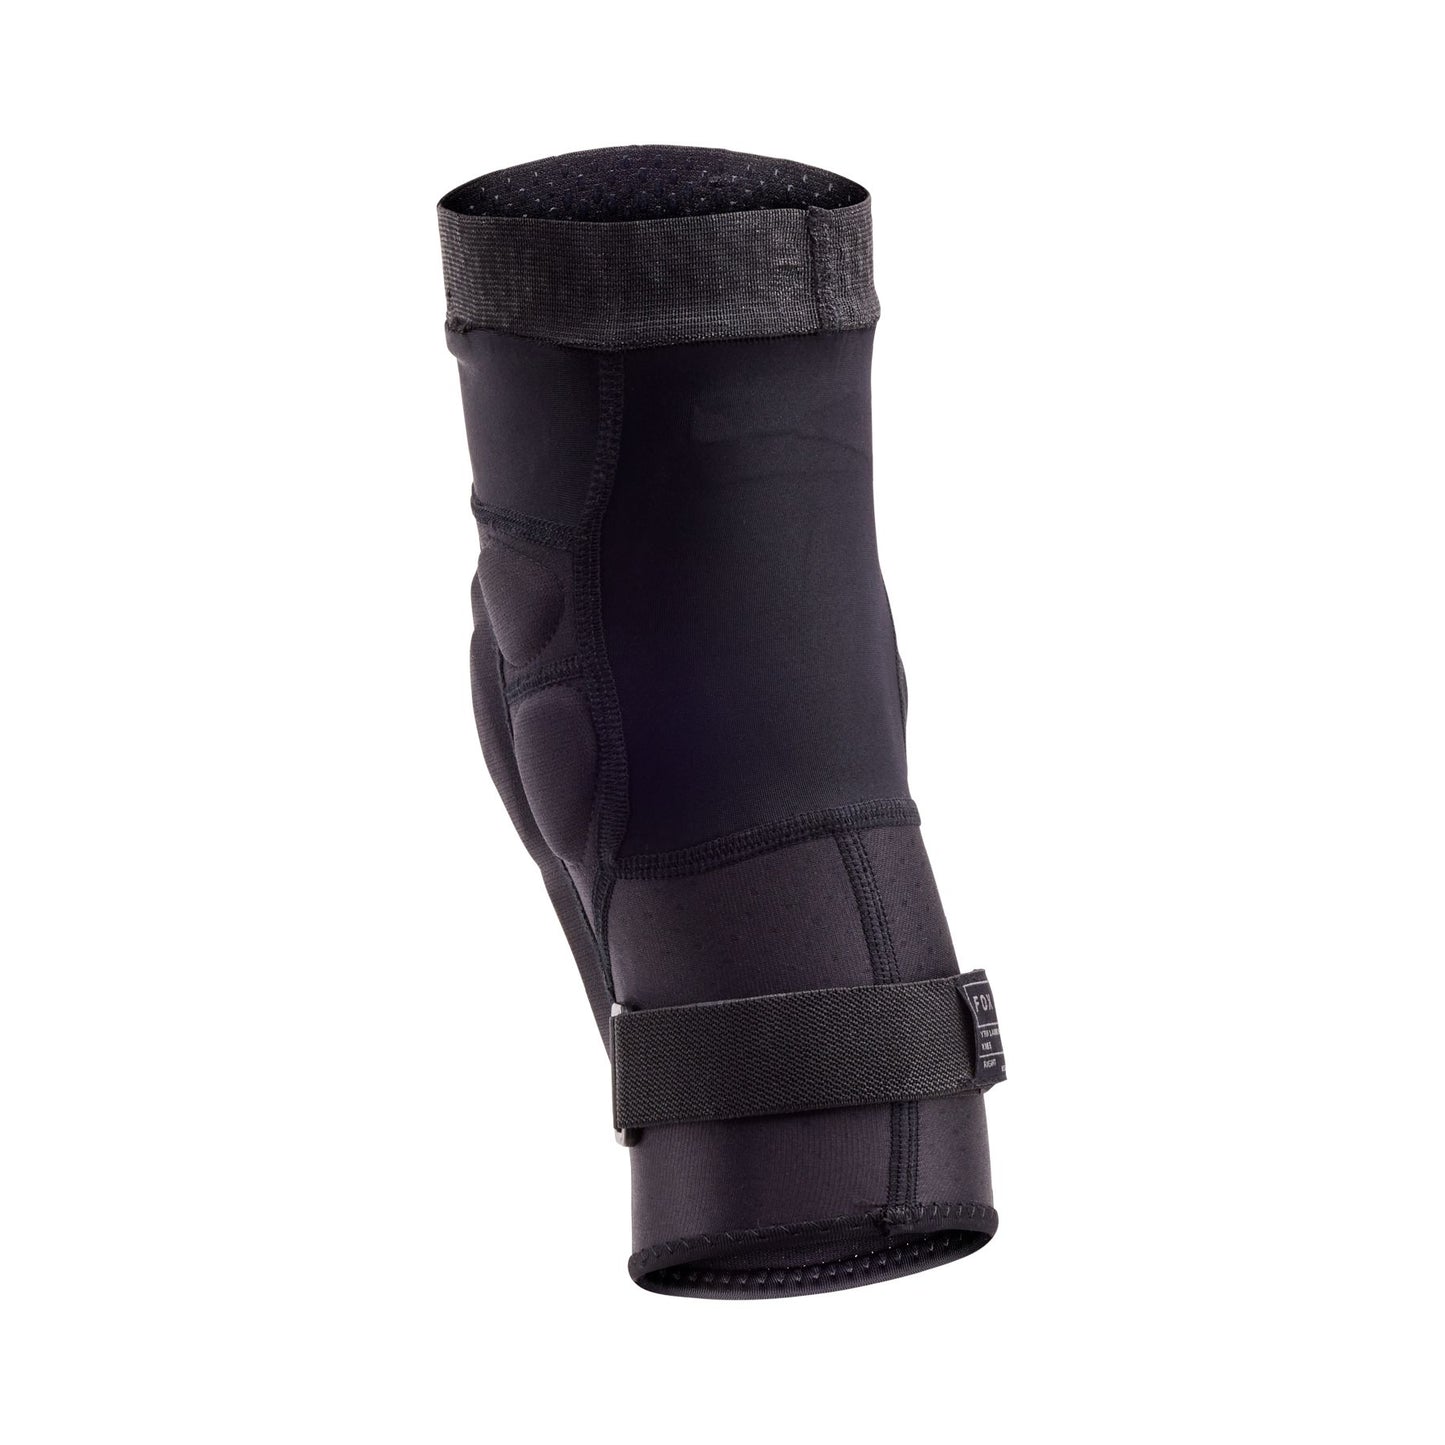 FOX Youth Launch Knee Guard - Blk